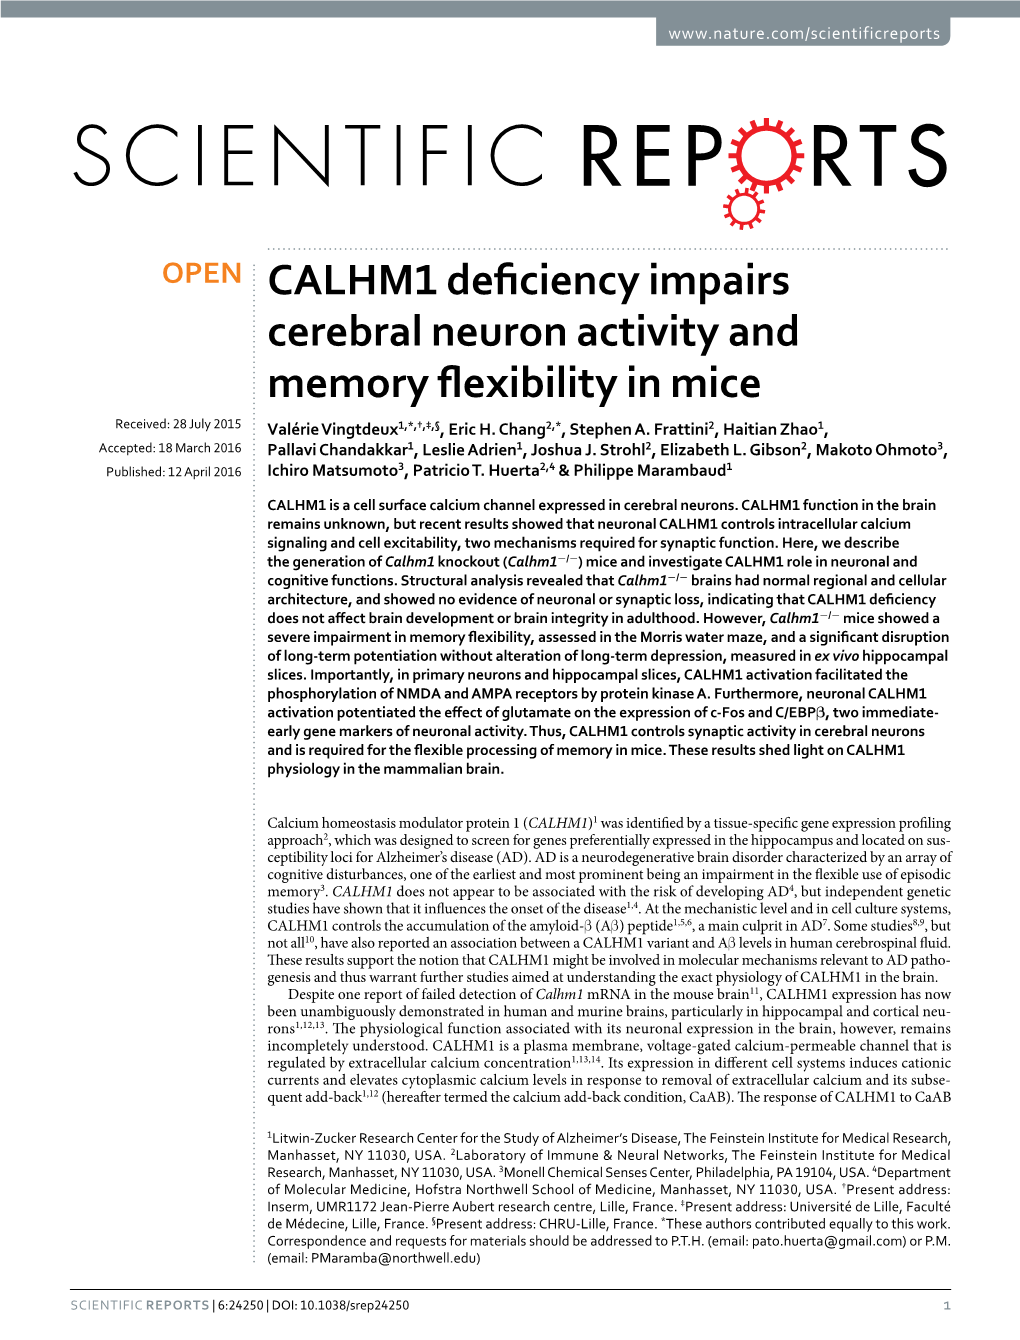 CALHM1 Deficiency Impairs Cerebral Neuron Activity and Memory Flexibility in Mice Received: 28 July 2015 Valérie Vingtdeux1,*,†,‡,§, Eric H